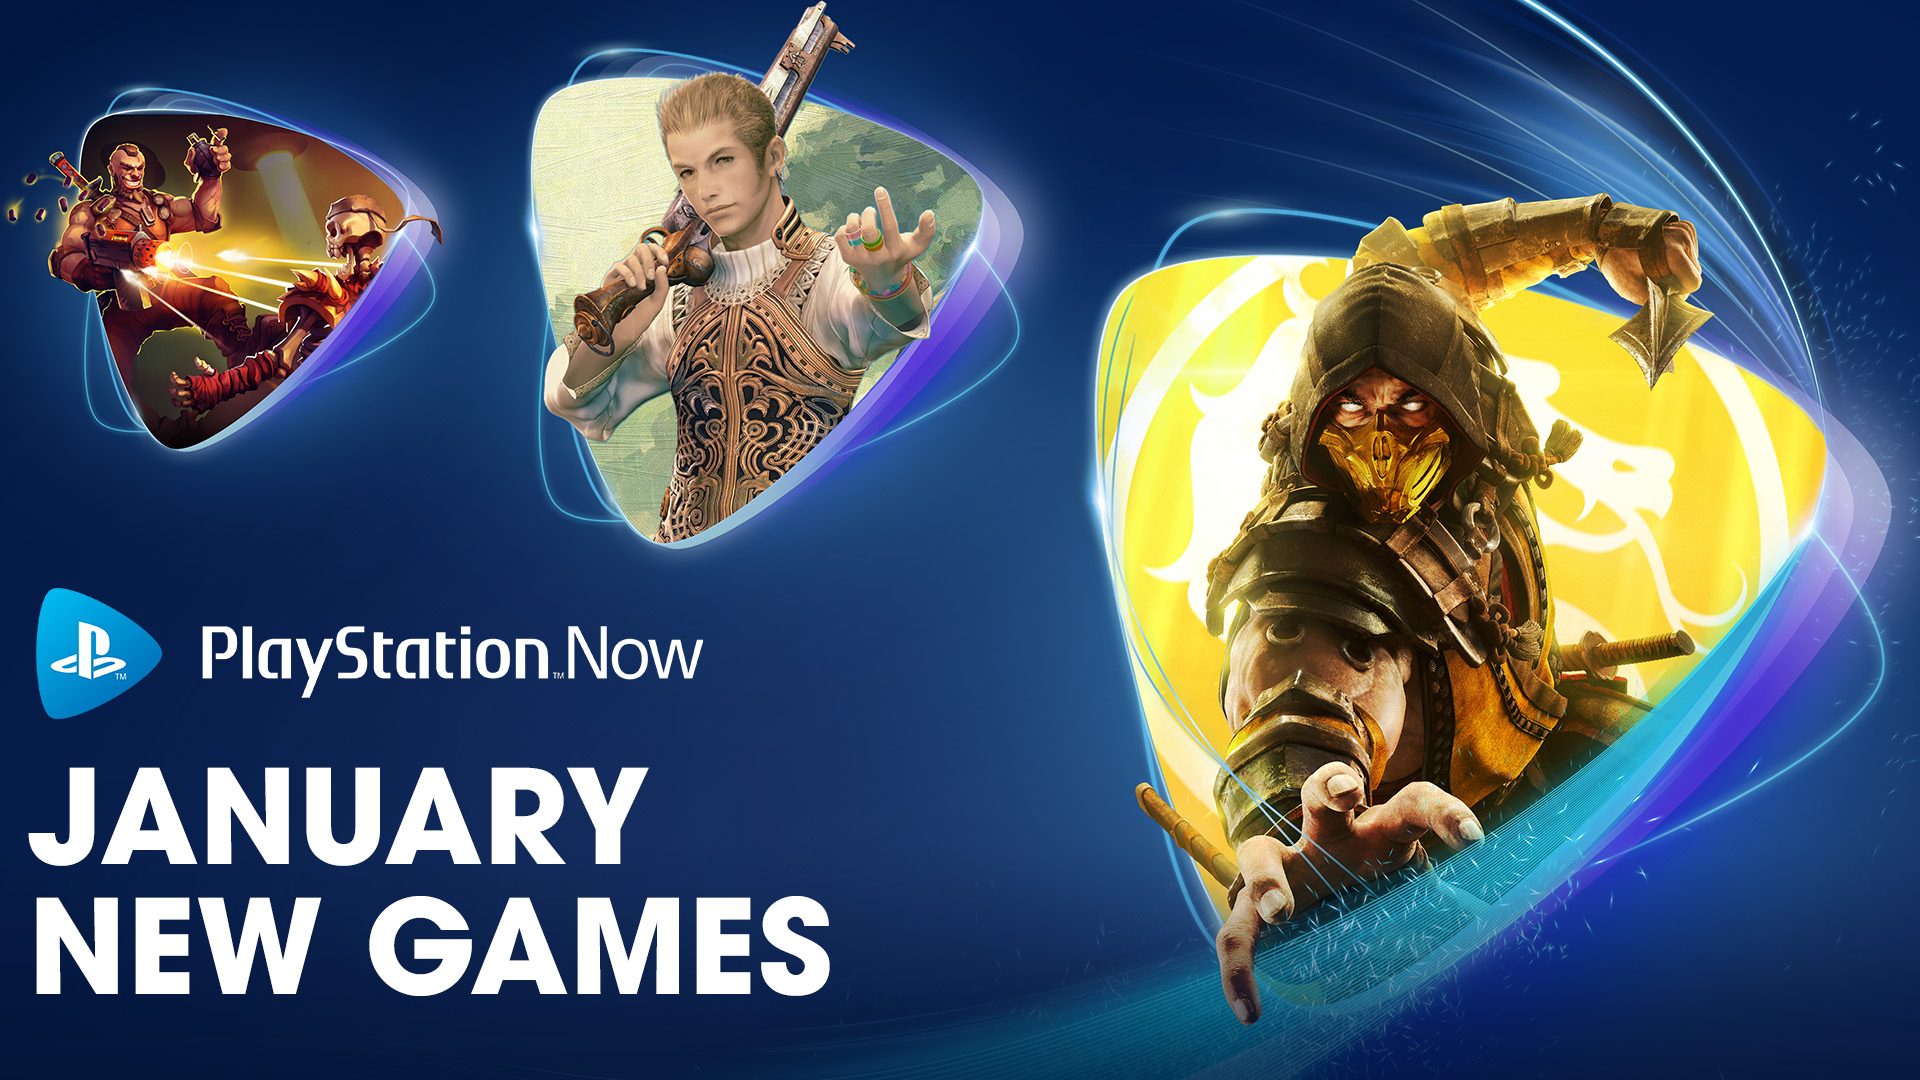 PlayStation Now Games For January 2022: Mortal Kombat 11, Final Fantasy XII: The Zodiac Age, Fury Unleashed thumbnail